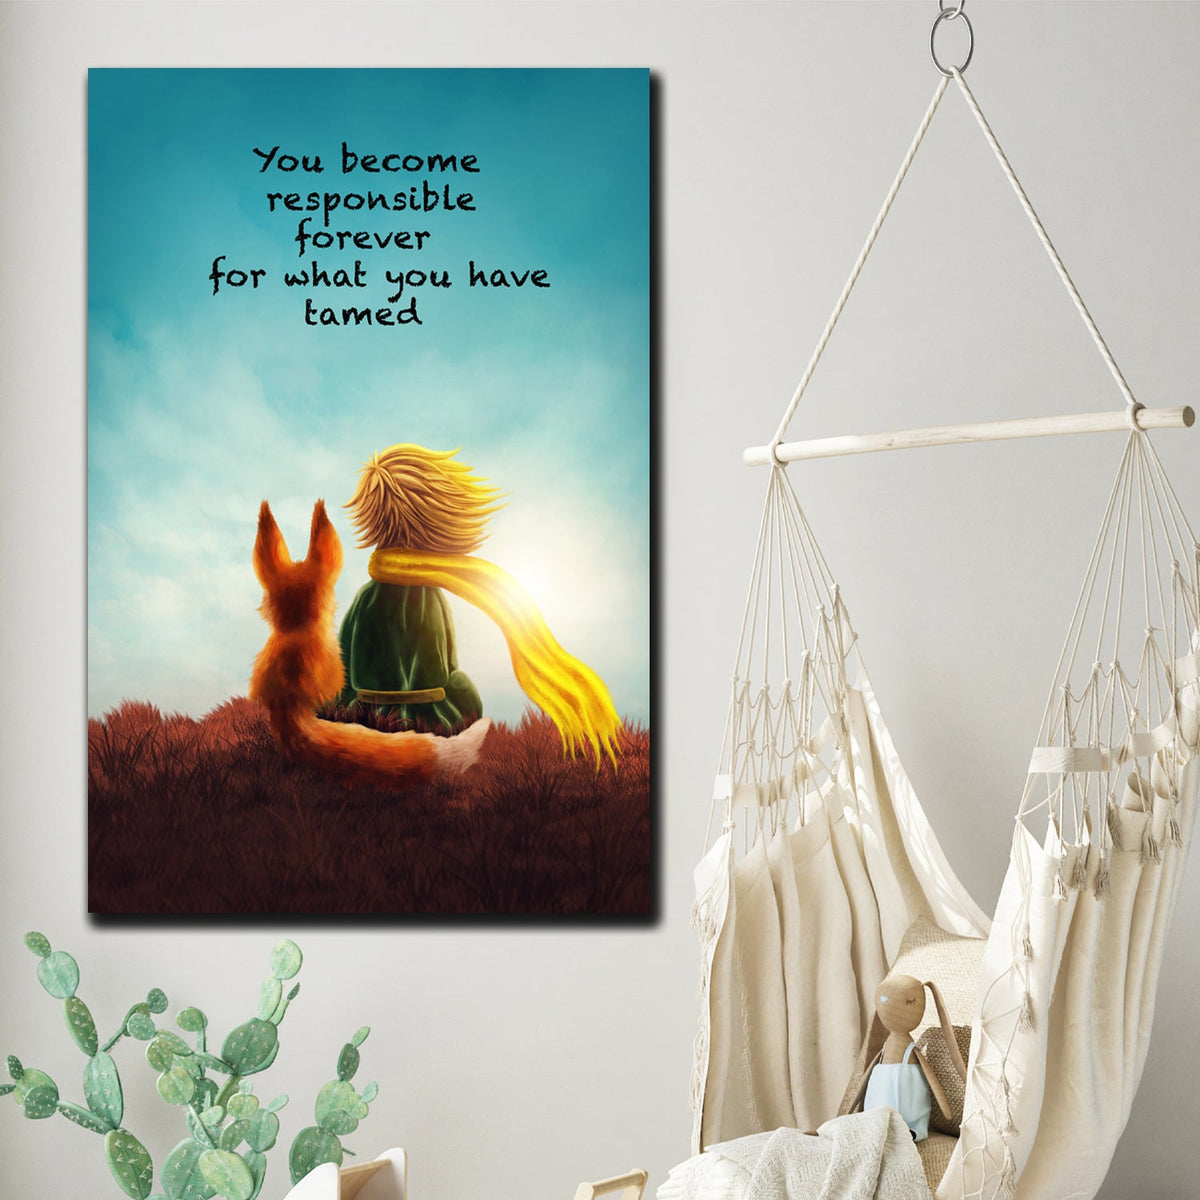 https://cdn.shopify.com/s/files/1/0387/9986/8044/products/TheFoxQuotefromTheLittlePrinceCanvasArtprintStretched-2.jpg